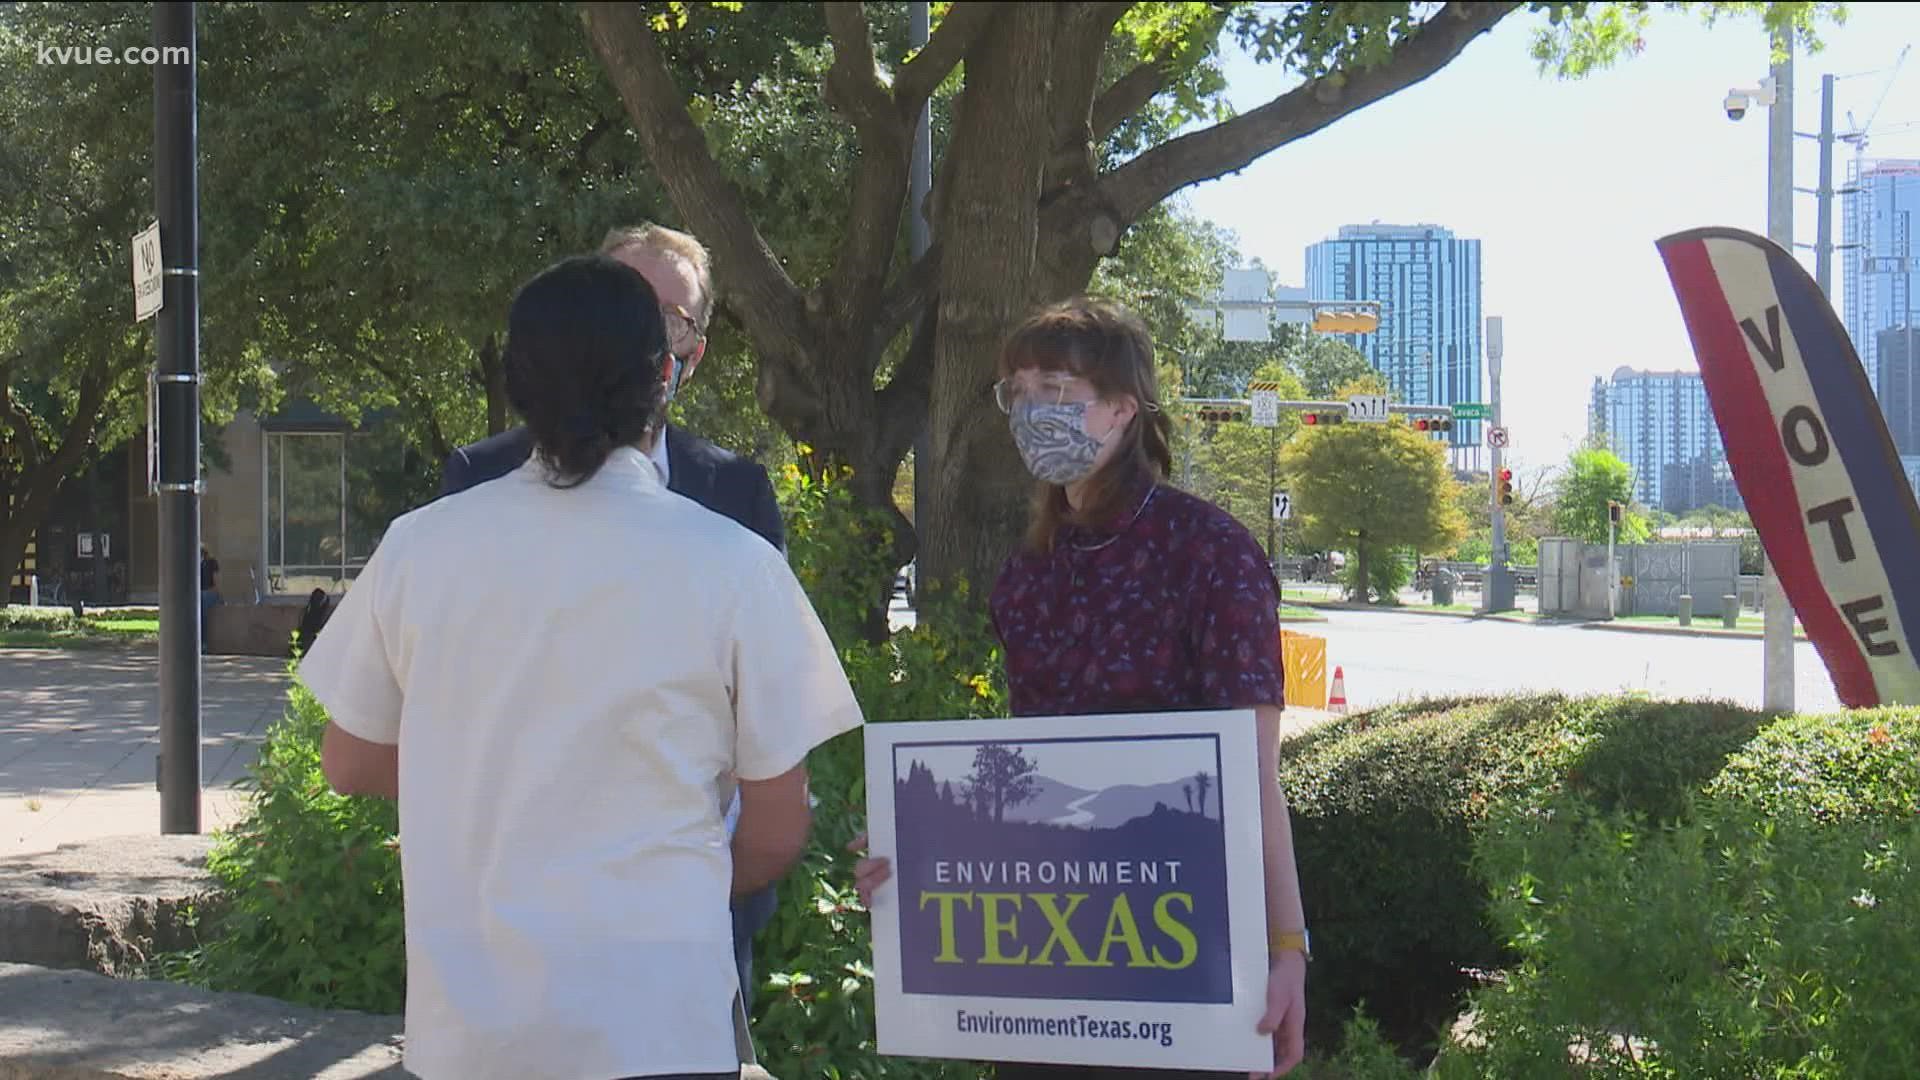 Members of the group delivered petitions on the subject to the Austin City Council Wednesday.